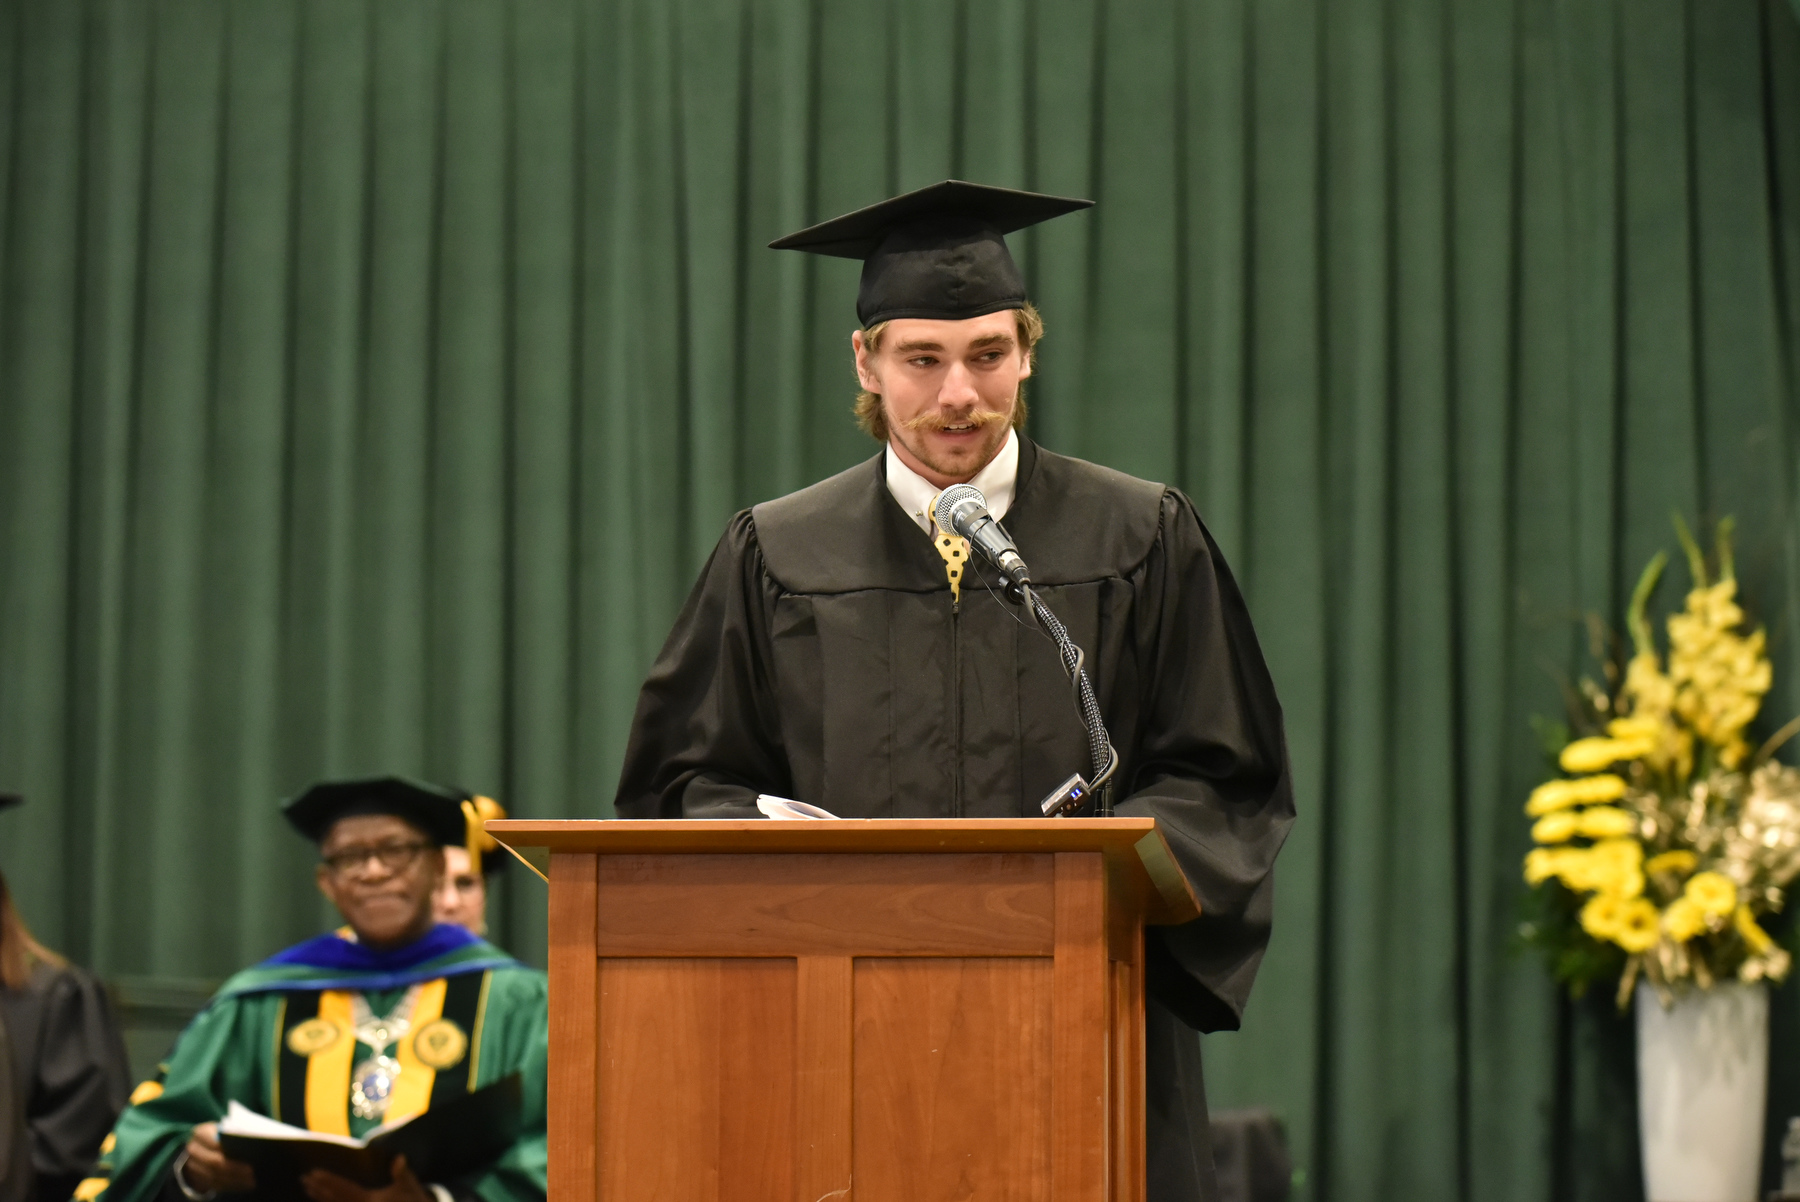 Austin Davis, Student Association president and one of many earning degrees during May 11 Commencement ceremonies, provides the student address at all three celebrations.